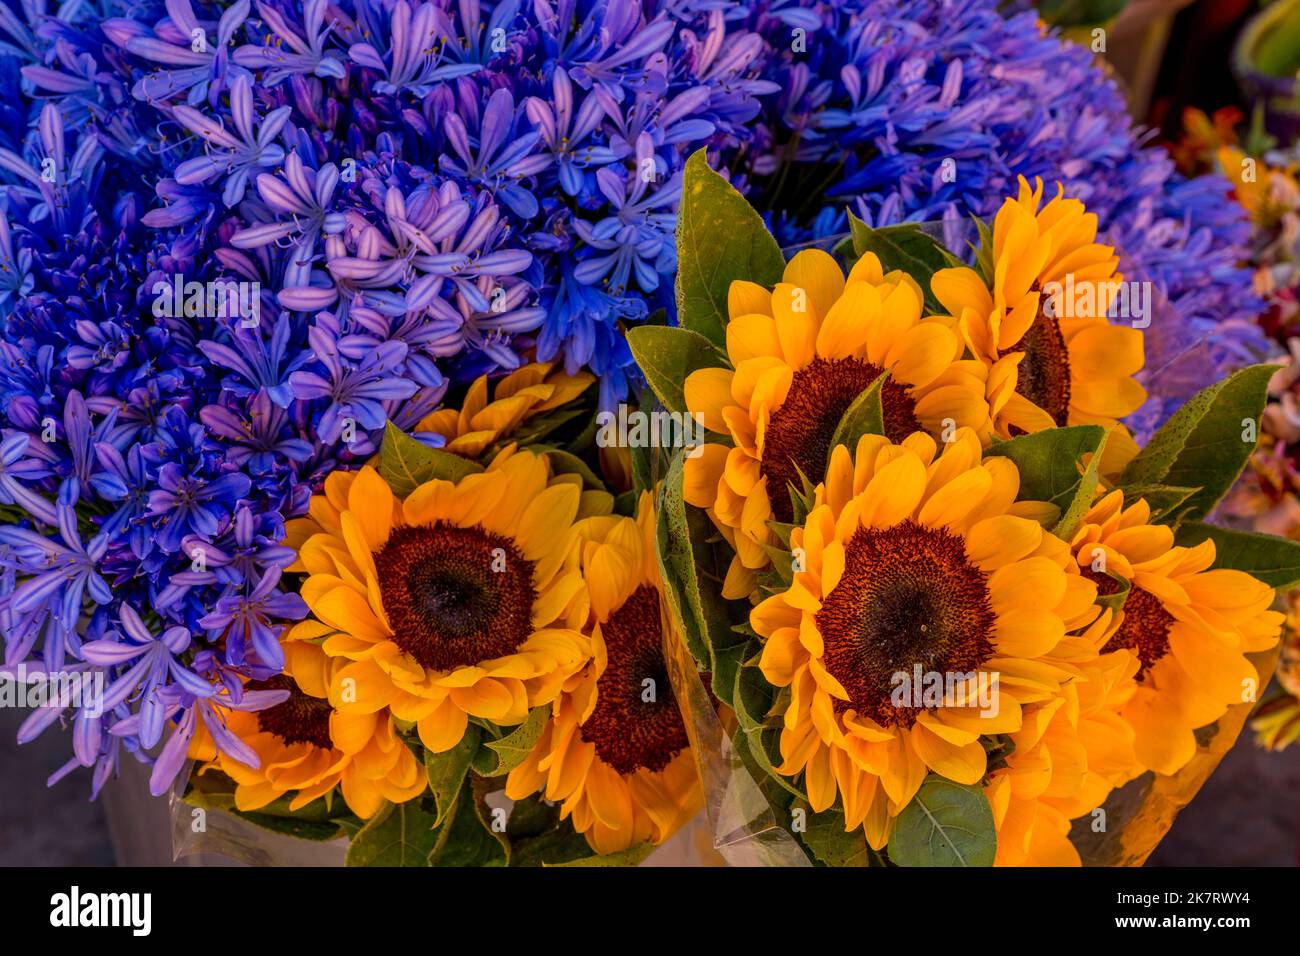 Agapanthus flowers and sunflowers for sale on the daily market in Teotitlan del Valle, a small town in the Valles Centrales Region near Oaxaca, southe Stock Photo